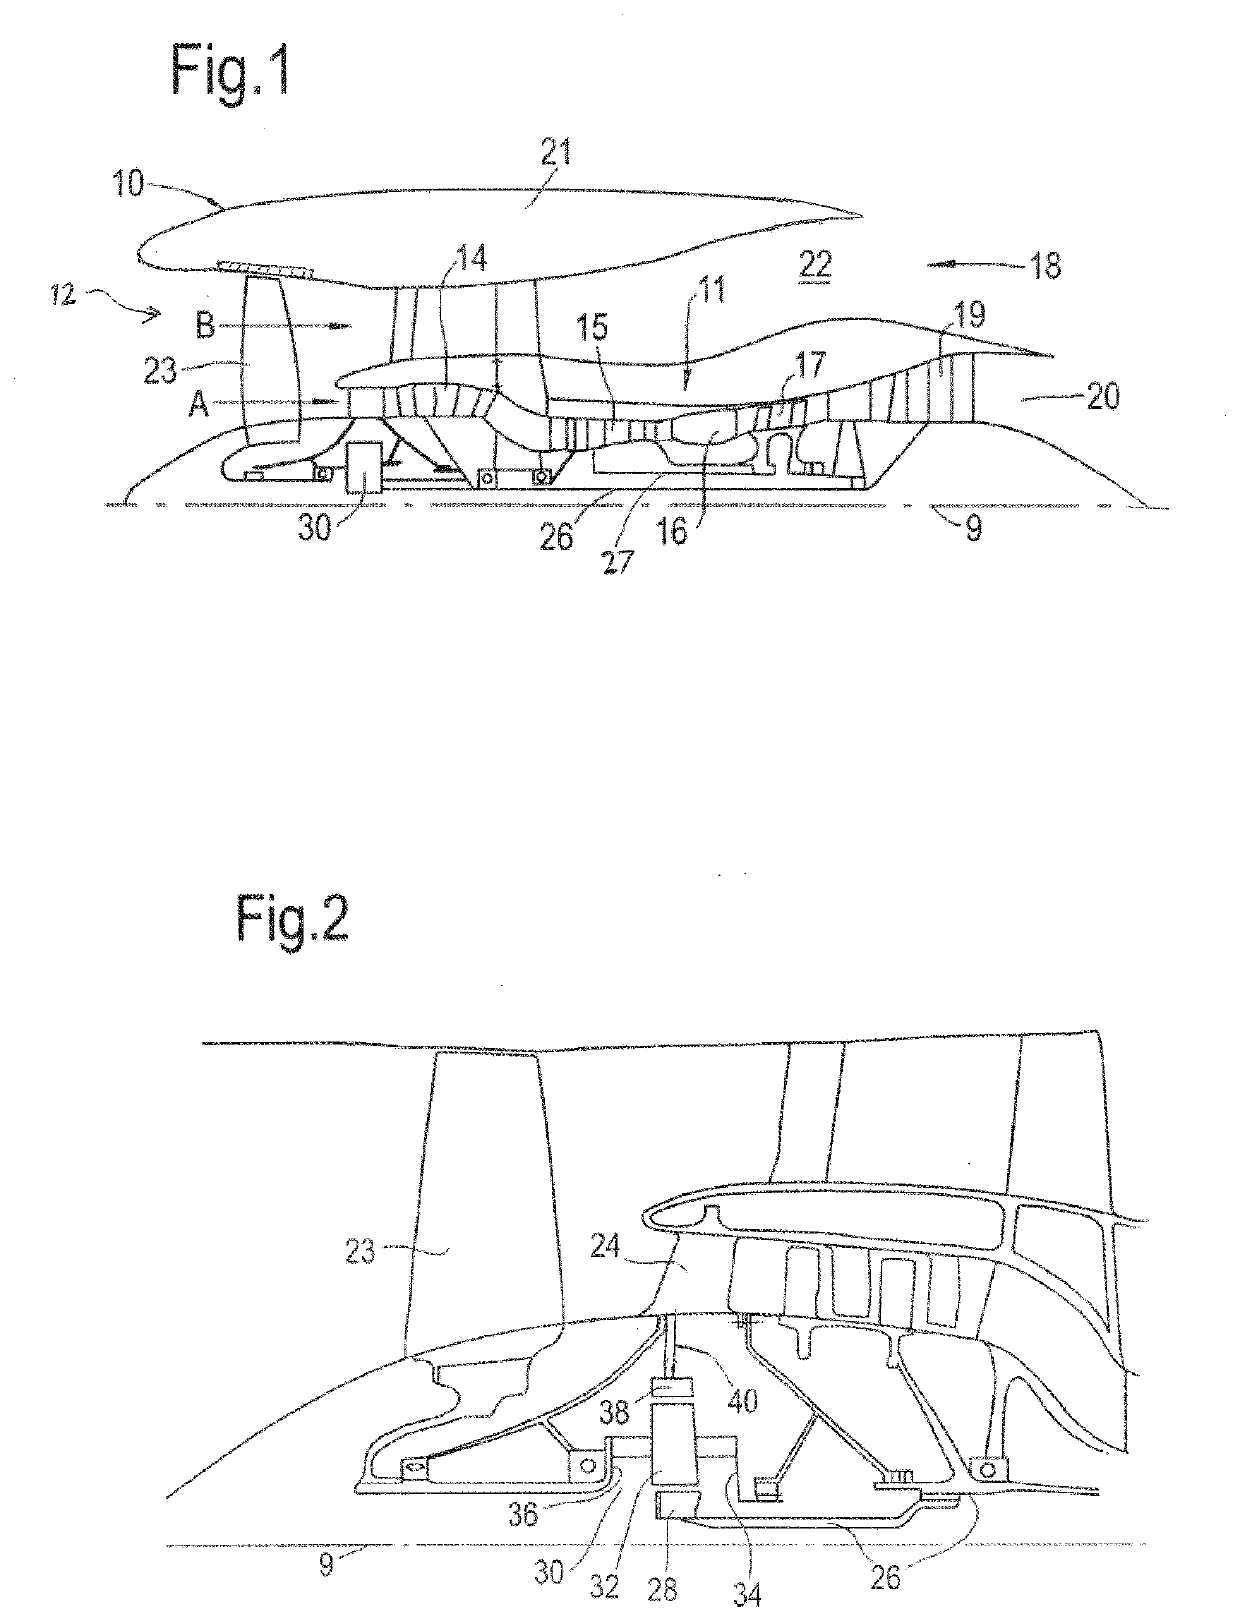 Windage shield system for a gas turbine engine